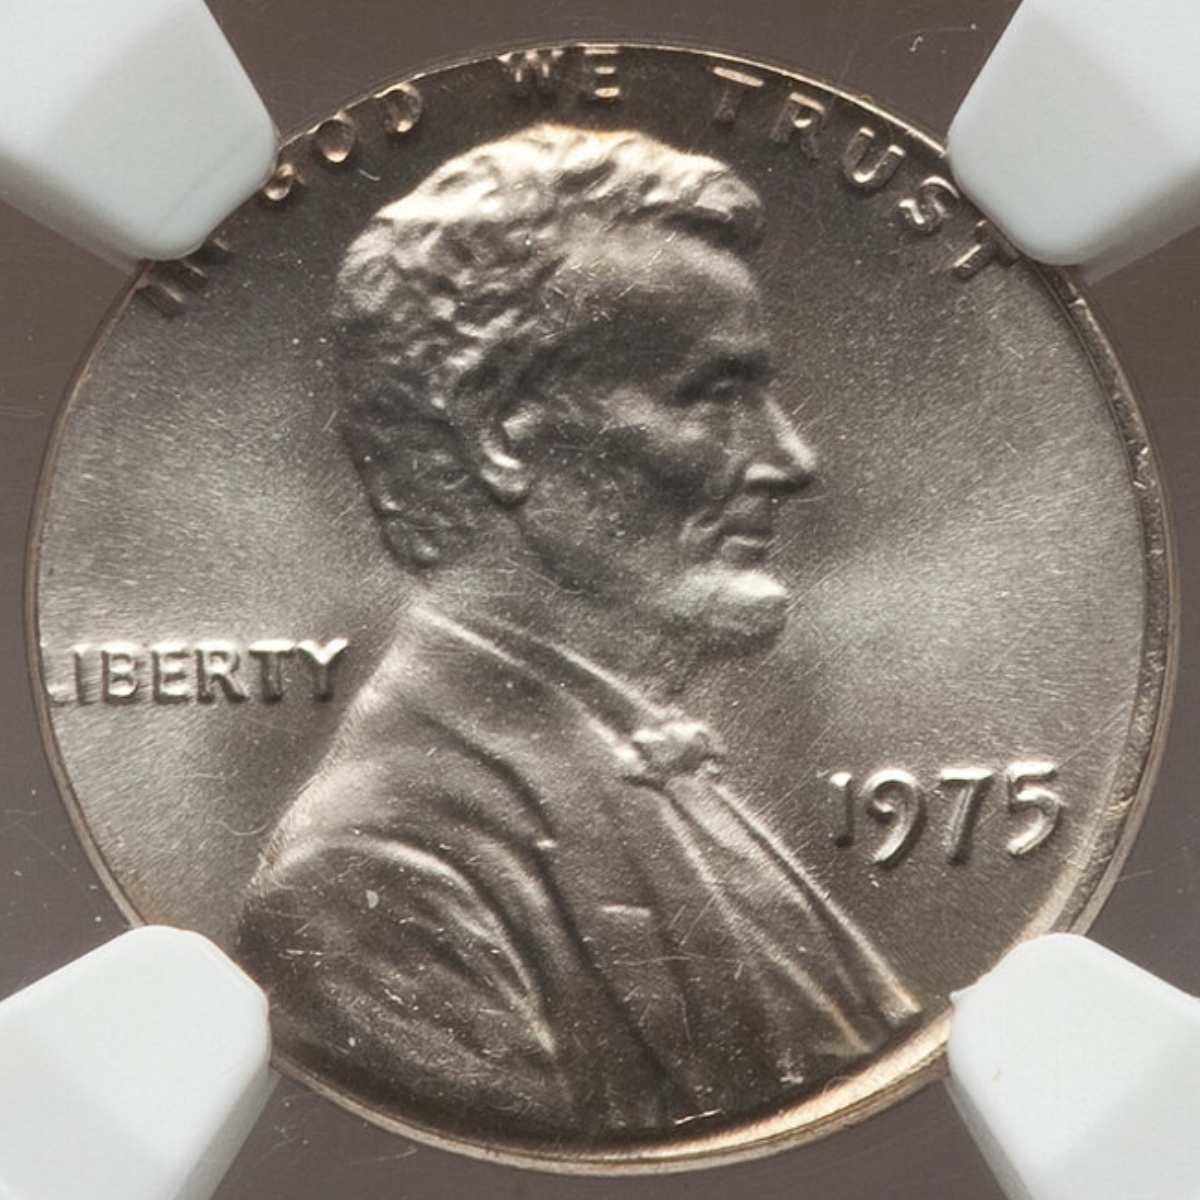 1975 Pennies Struck on Dime Planchets